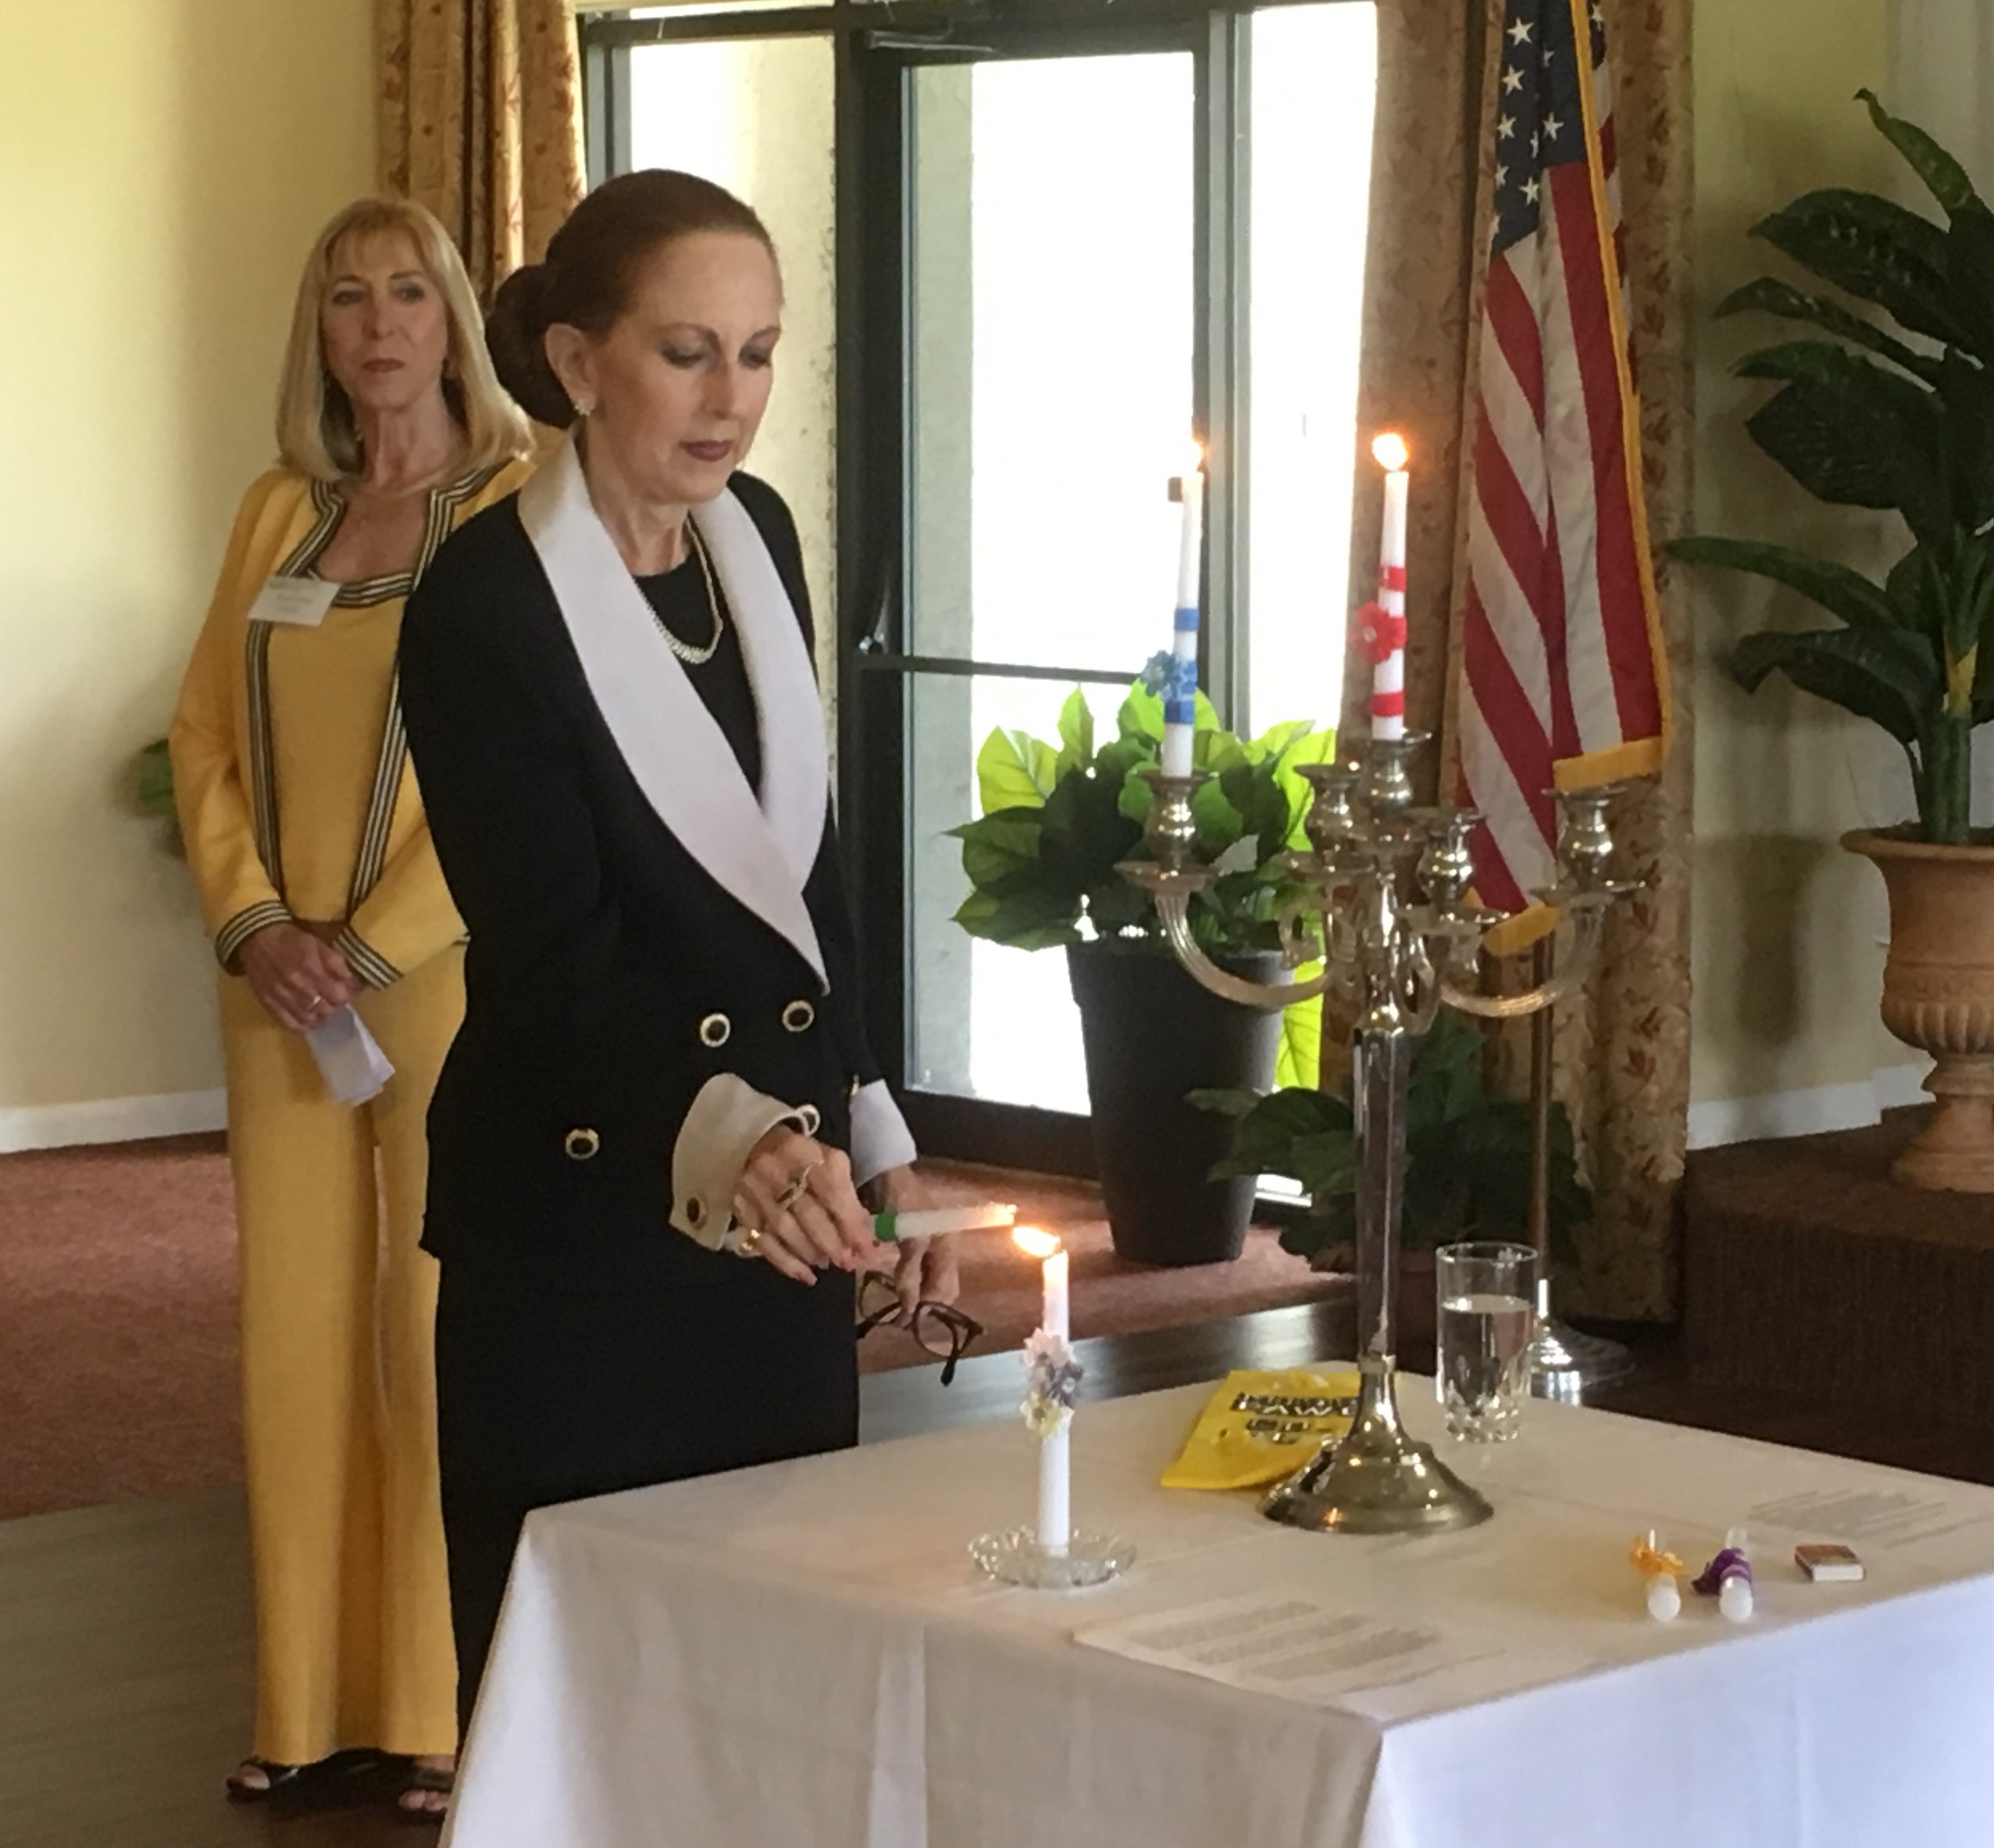 Susan Romine lights the ceremonial candle